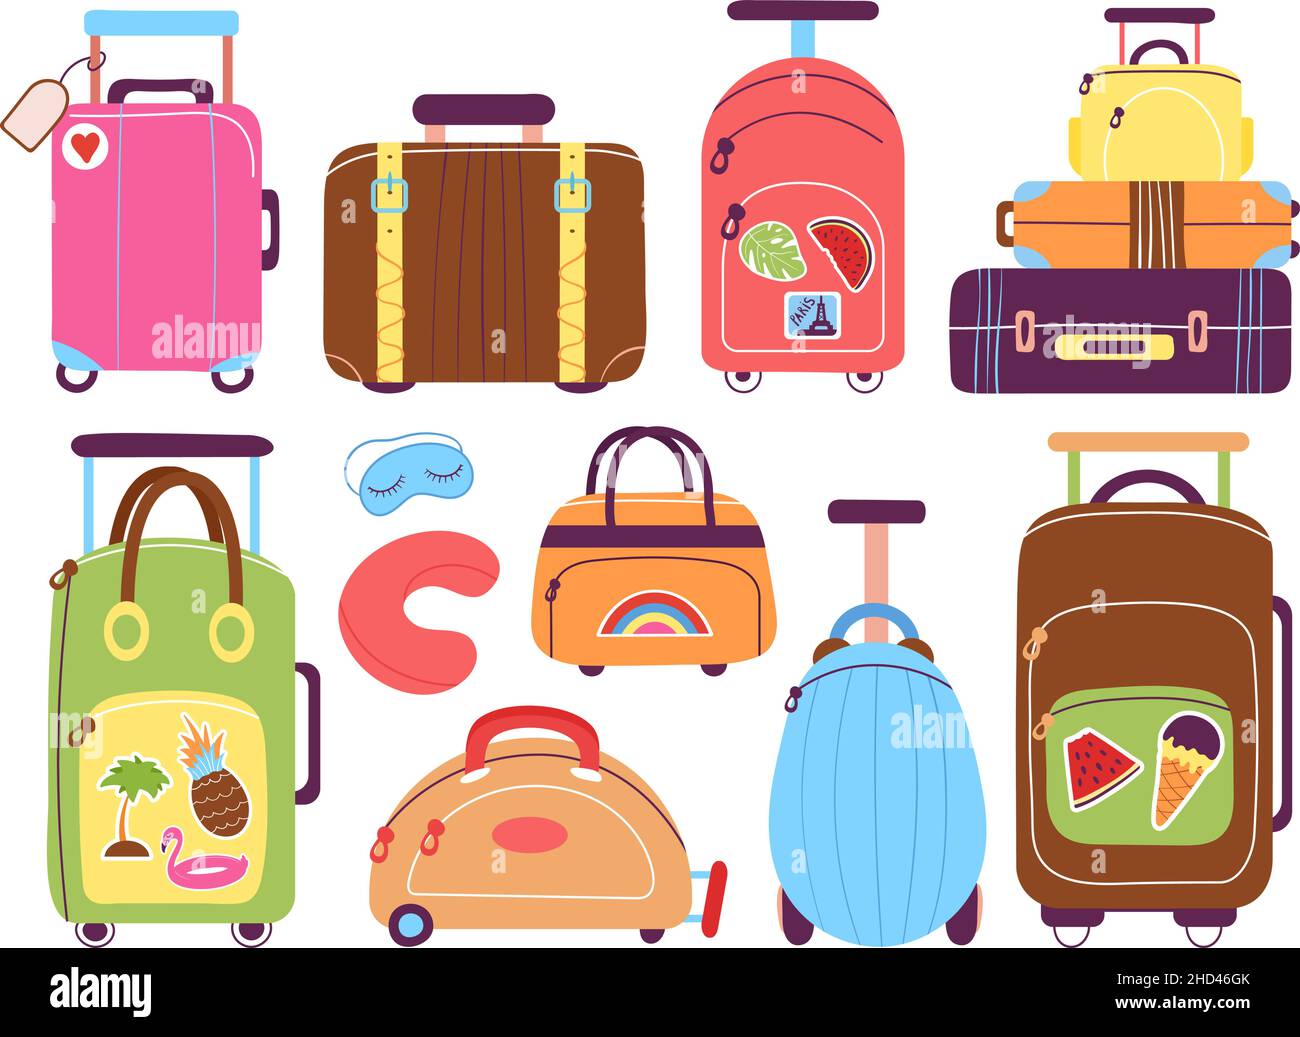 Suitcases. Trip luggage, cartoon suitcase pack. Traveler stuff, tourism and vacations. Travelling bags, backpacks for journey. Flat voyage decent Stock Vector